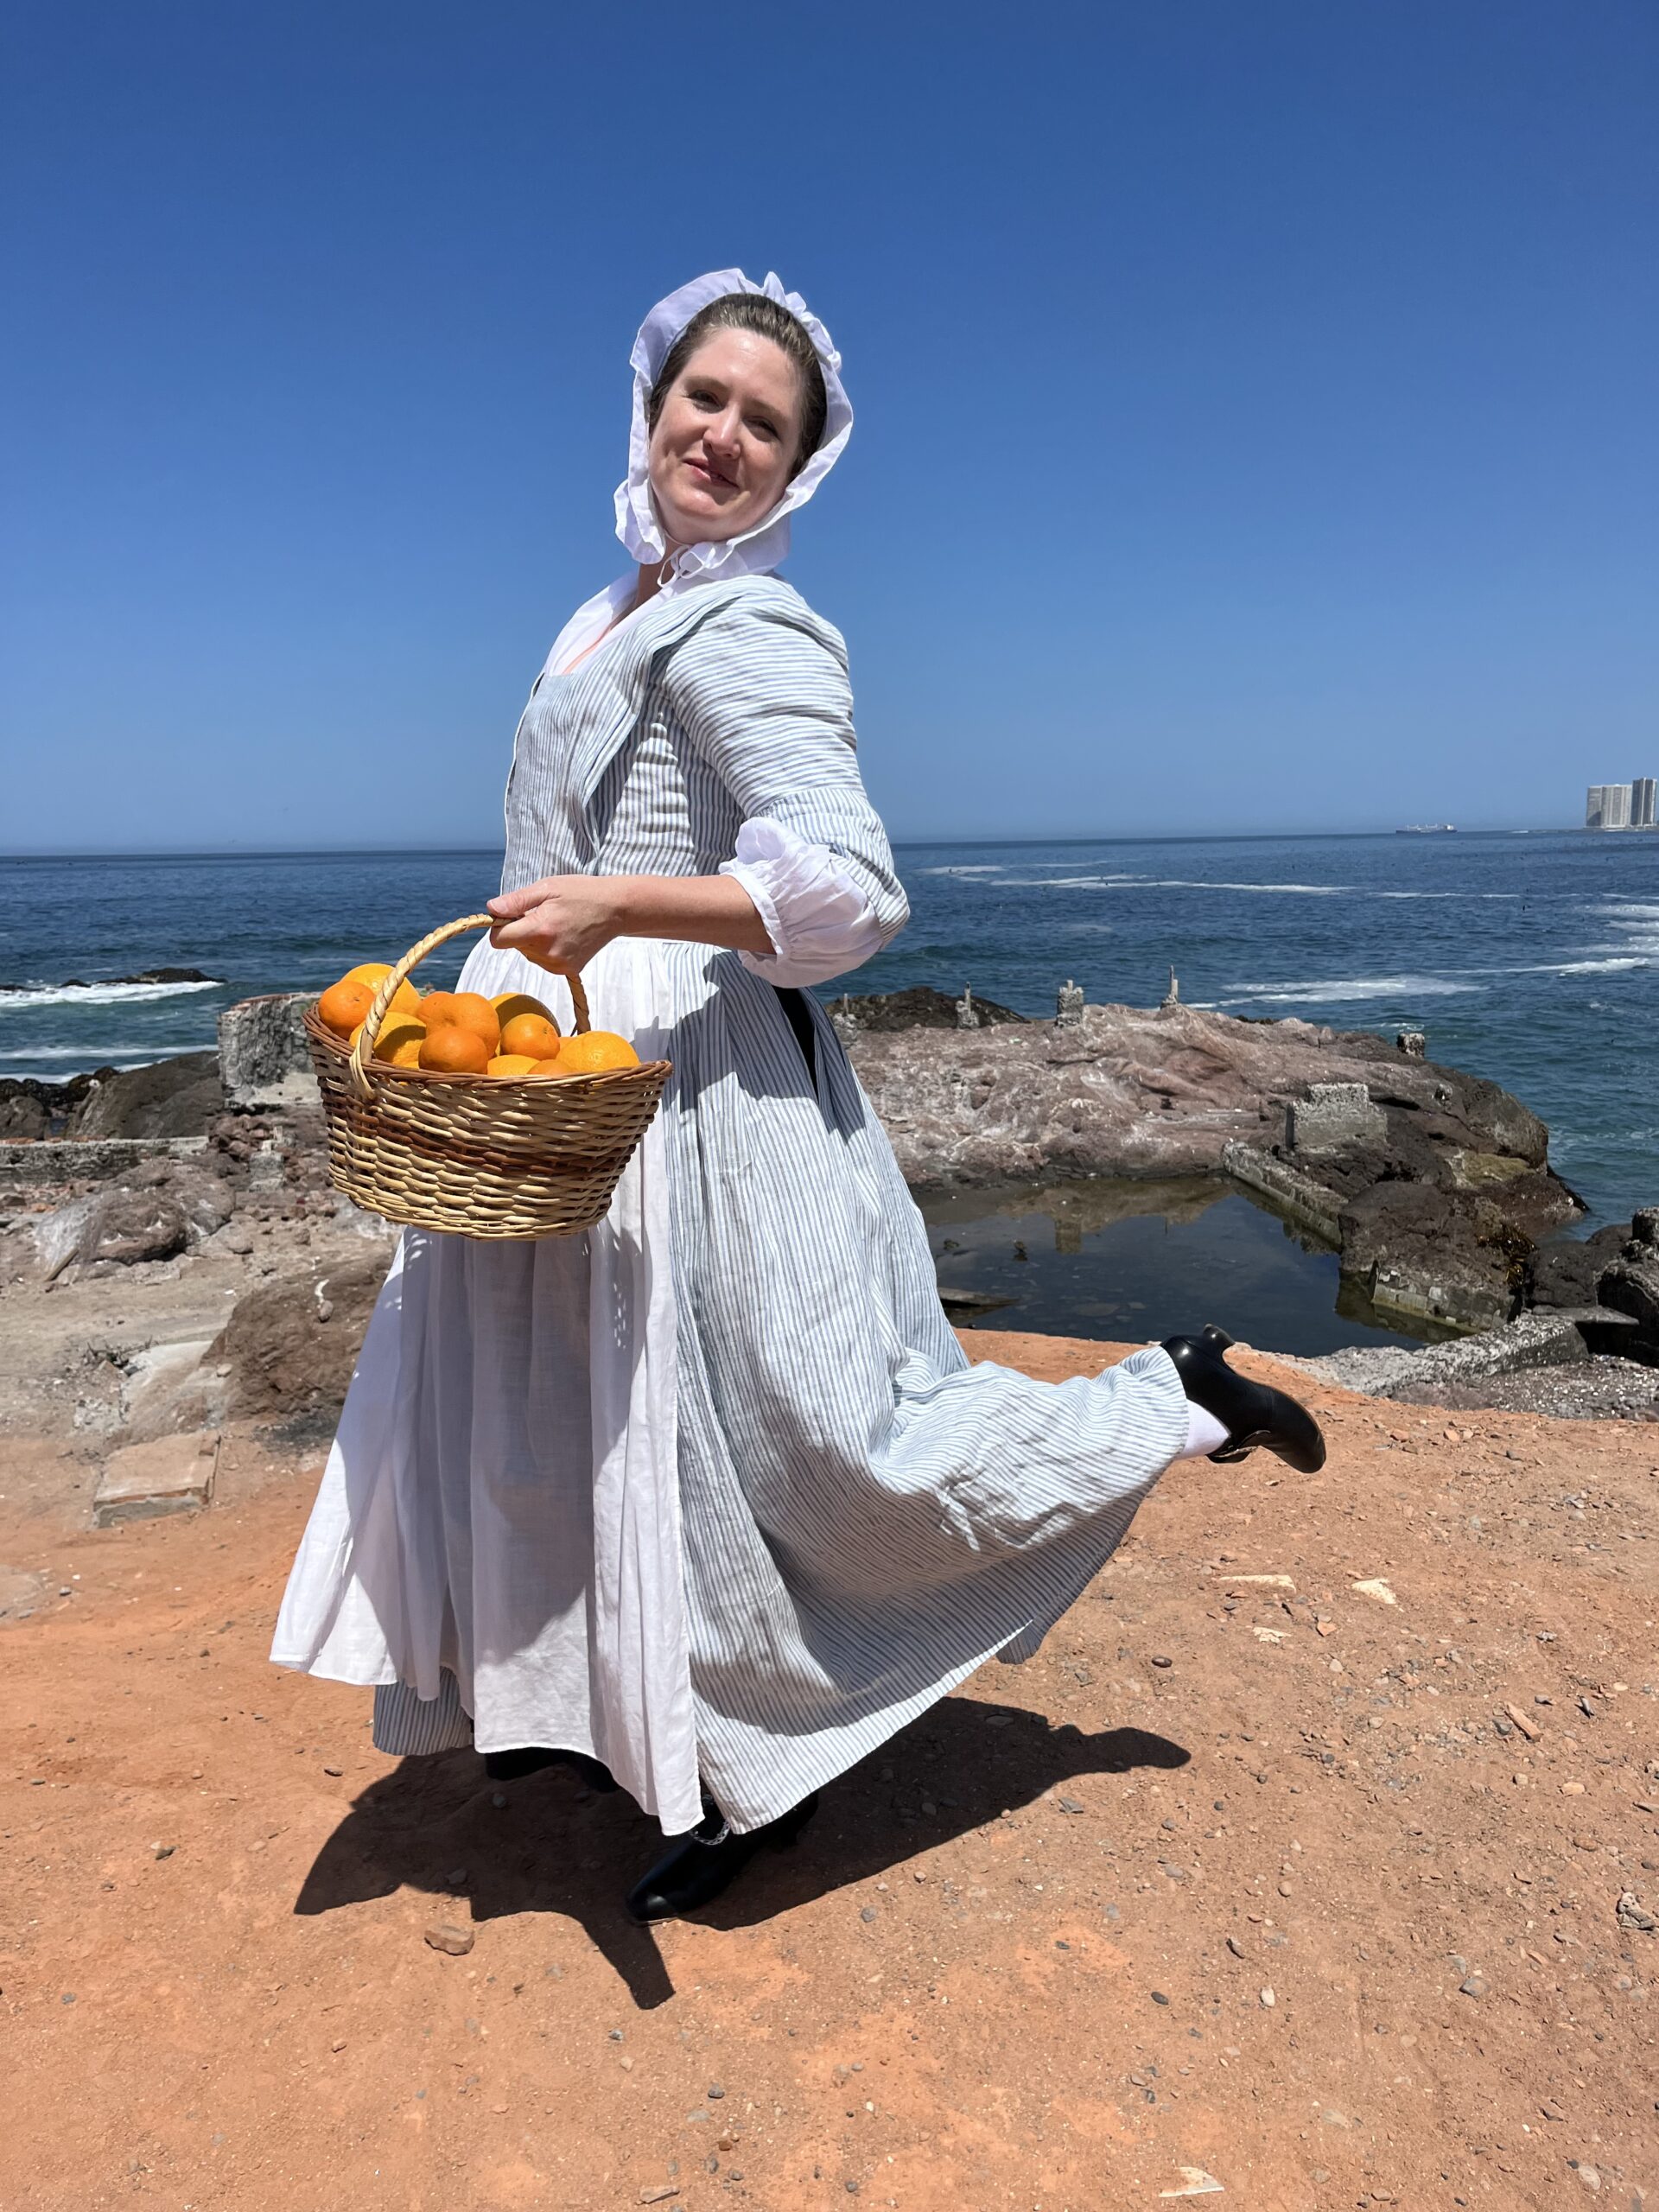 Tabubilgirl dances on a barren, rocky seashore. She wears a striped linen English nightgown and a white linen lappet cap and carries a basket of oranges.